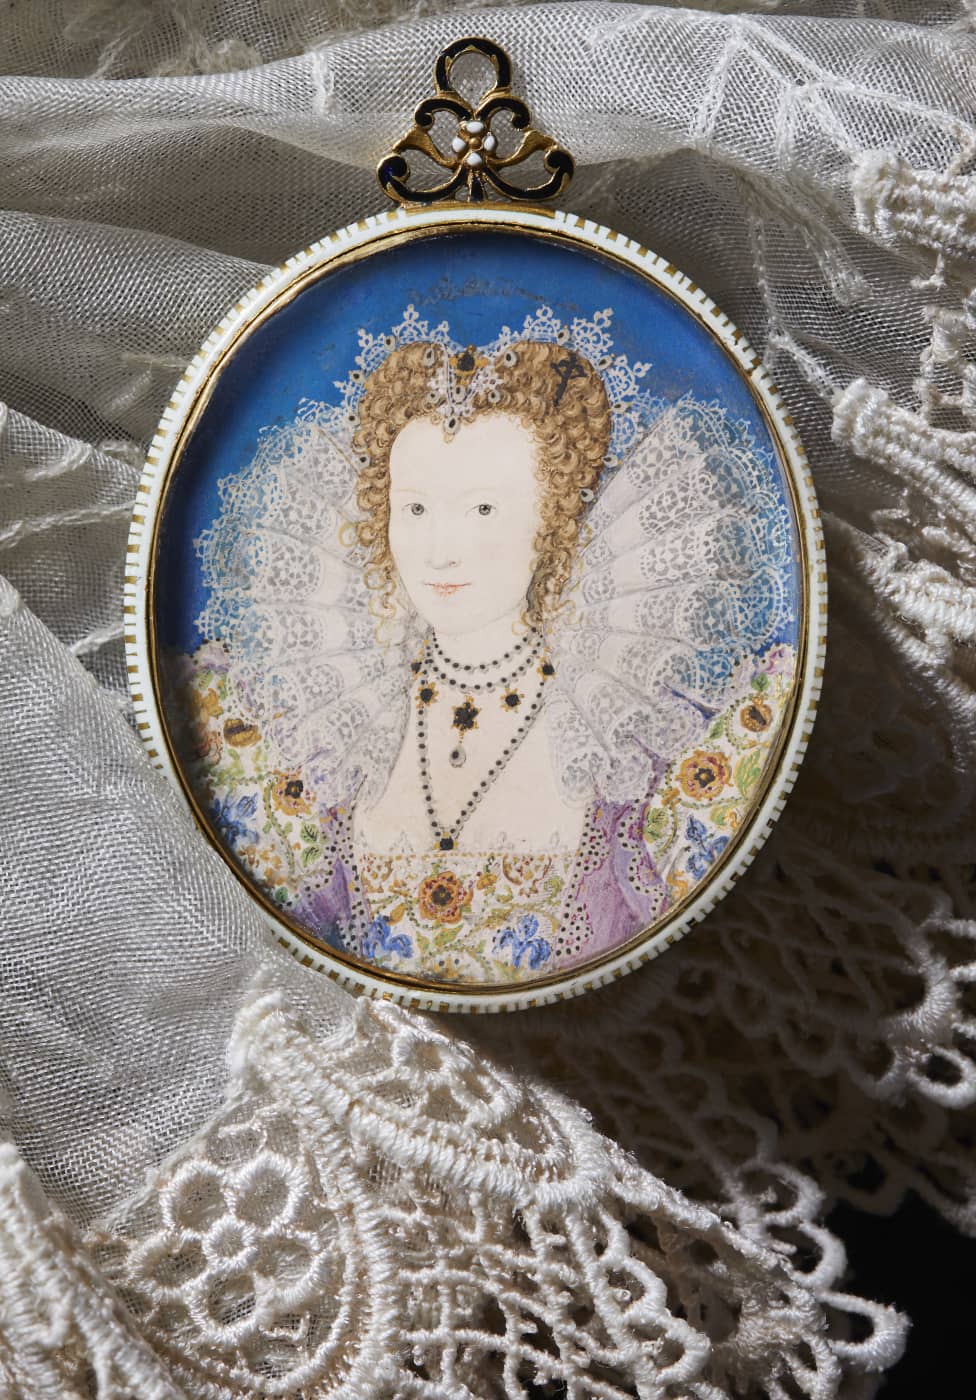 A portrait miniature of a Tudor Lady in Court. She wears a large lace ruff, with a floral dress against a bright blue backgound This artwork by Nicholas Hilliard has sold.